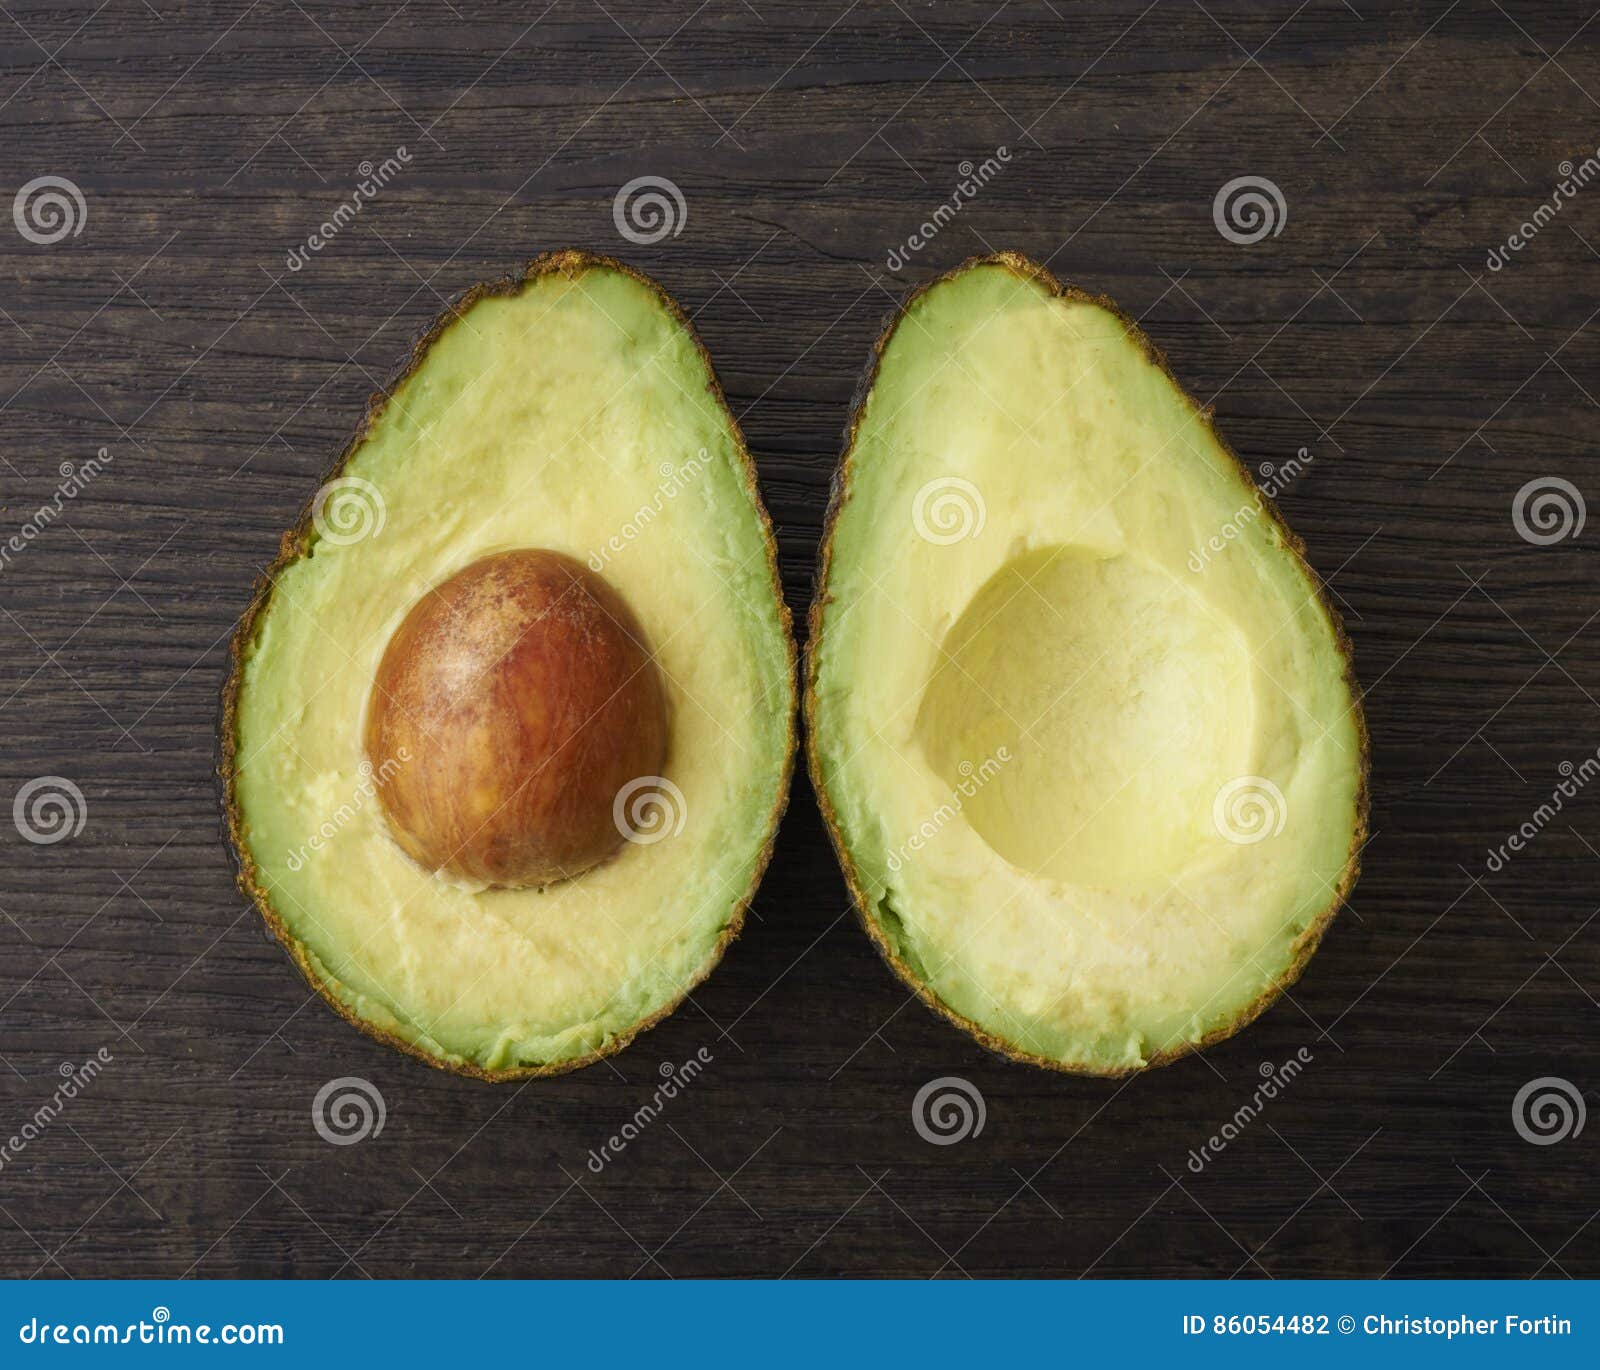 cut avocado halves with seed